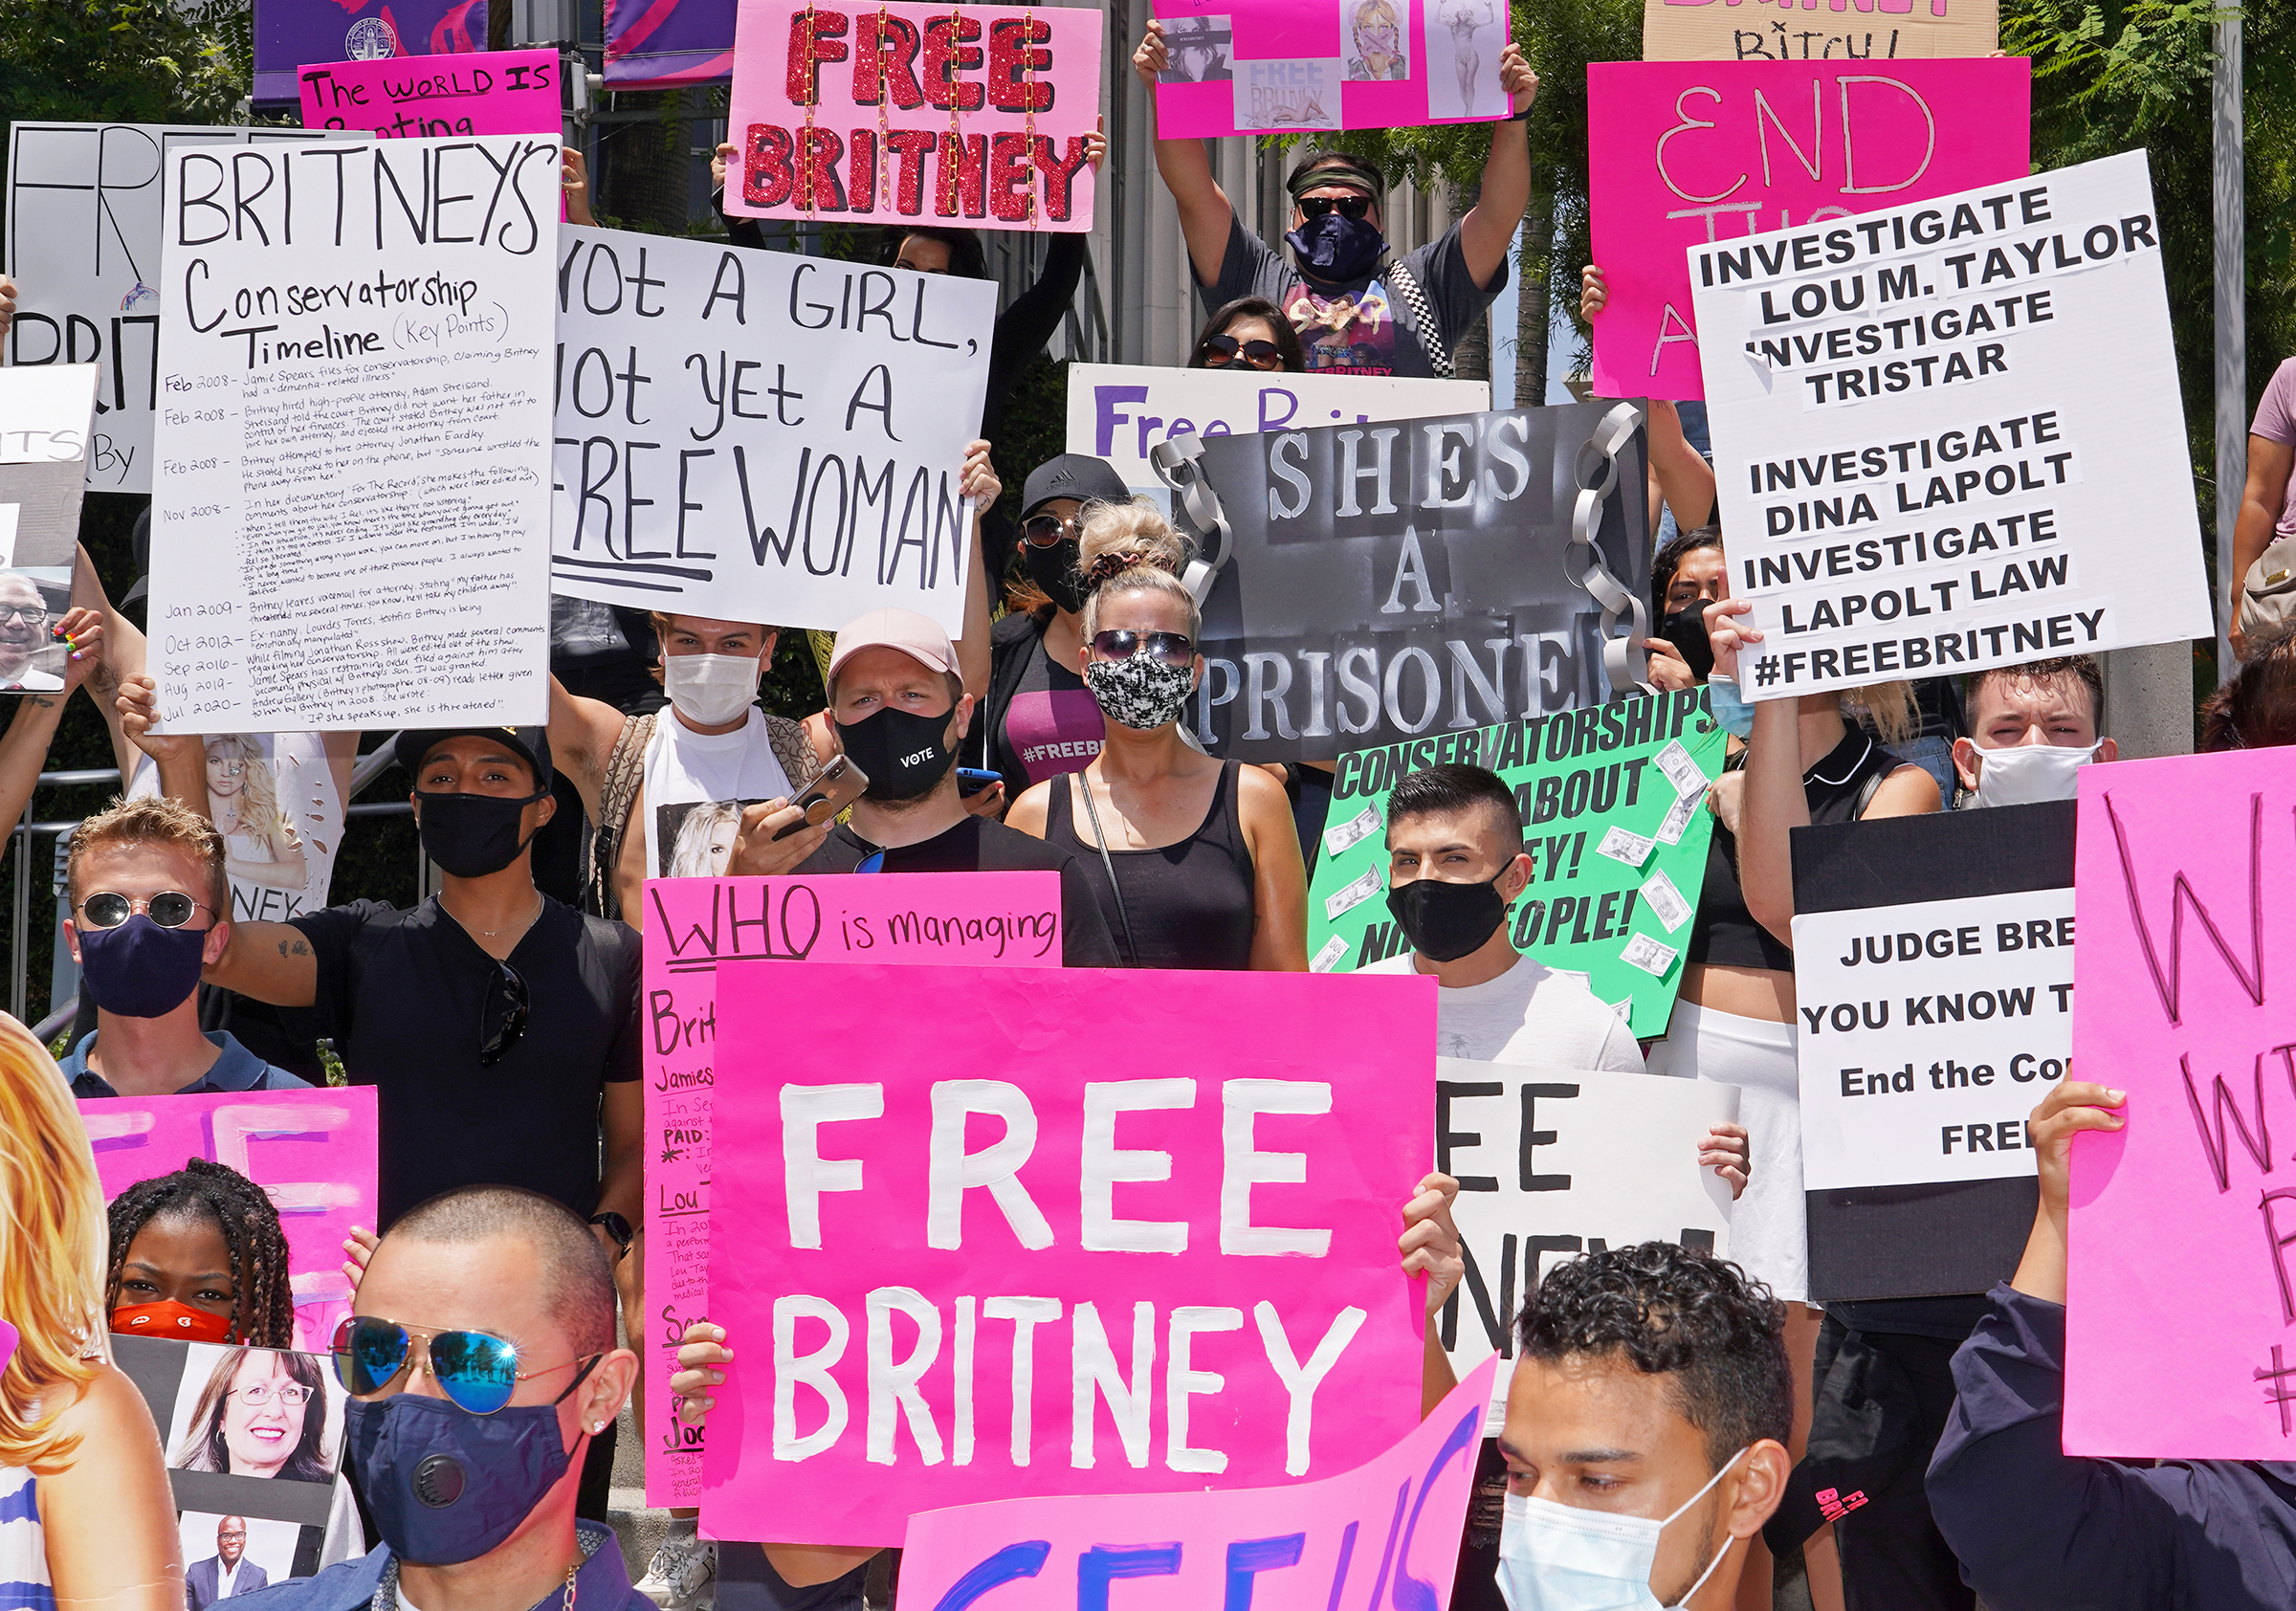 Protesters outside a hearing relating to Britney Spears' conservatorship in Downtown Los Angeles in July 2020.